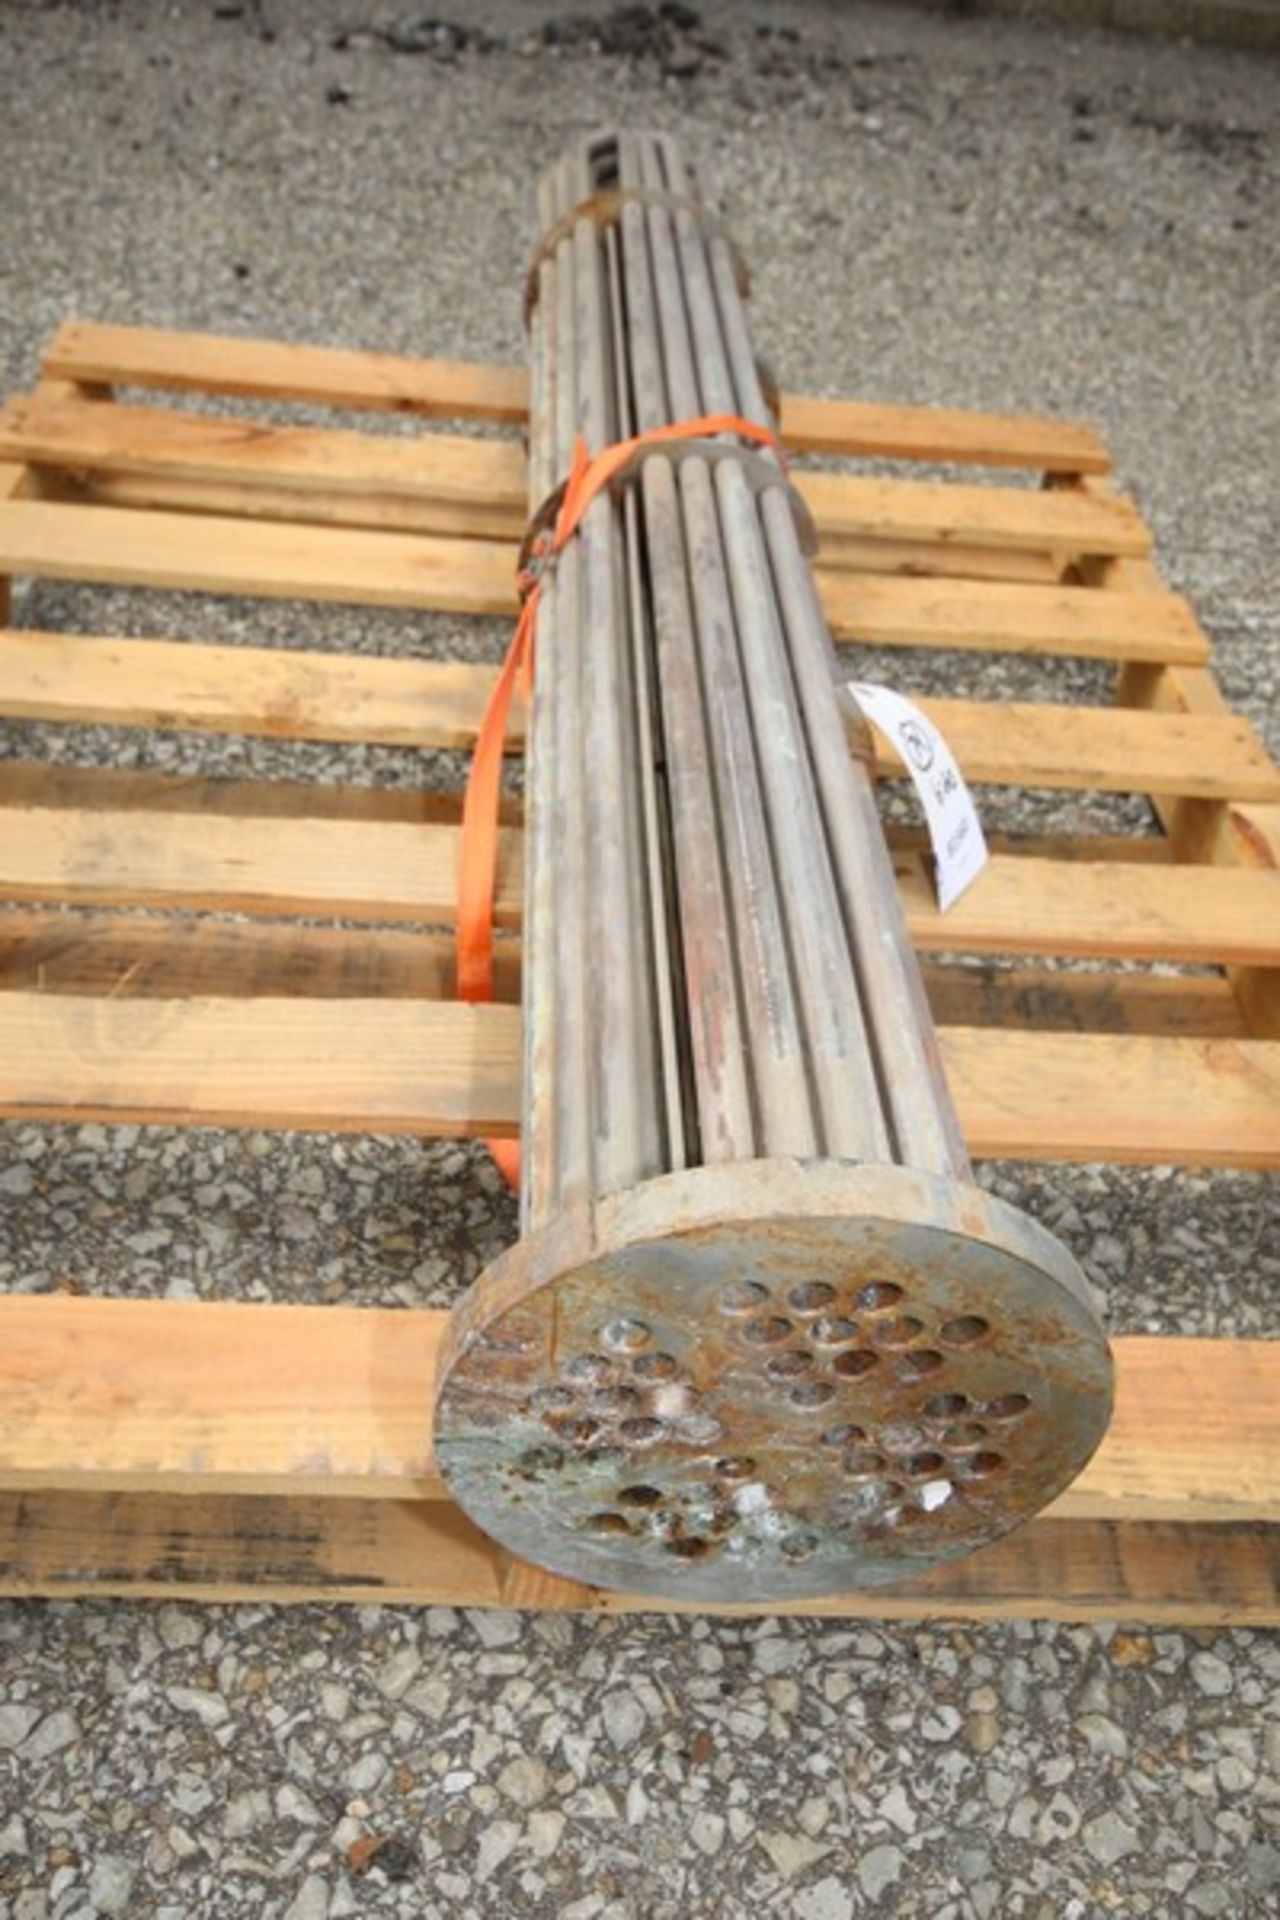 Aprox. 5' L x 10" W S/S Shell & Tube Internal Bundle (INV#81560)(Located @ the MDG Auction